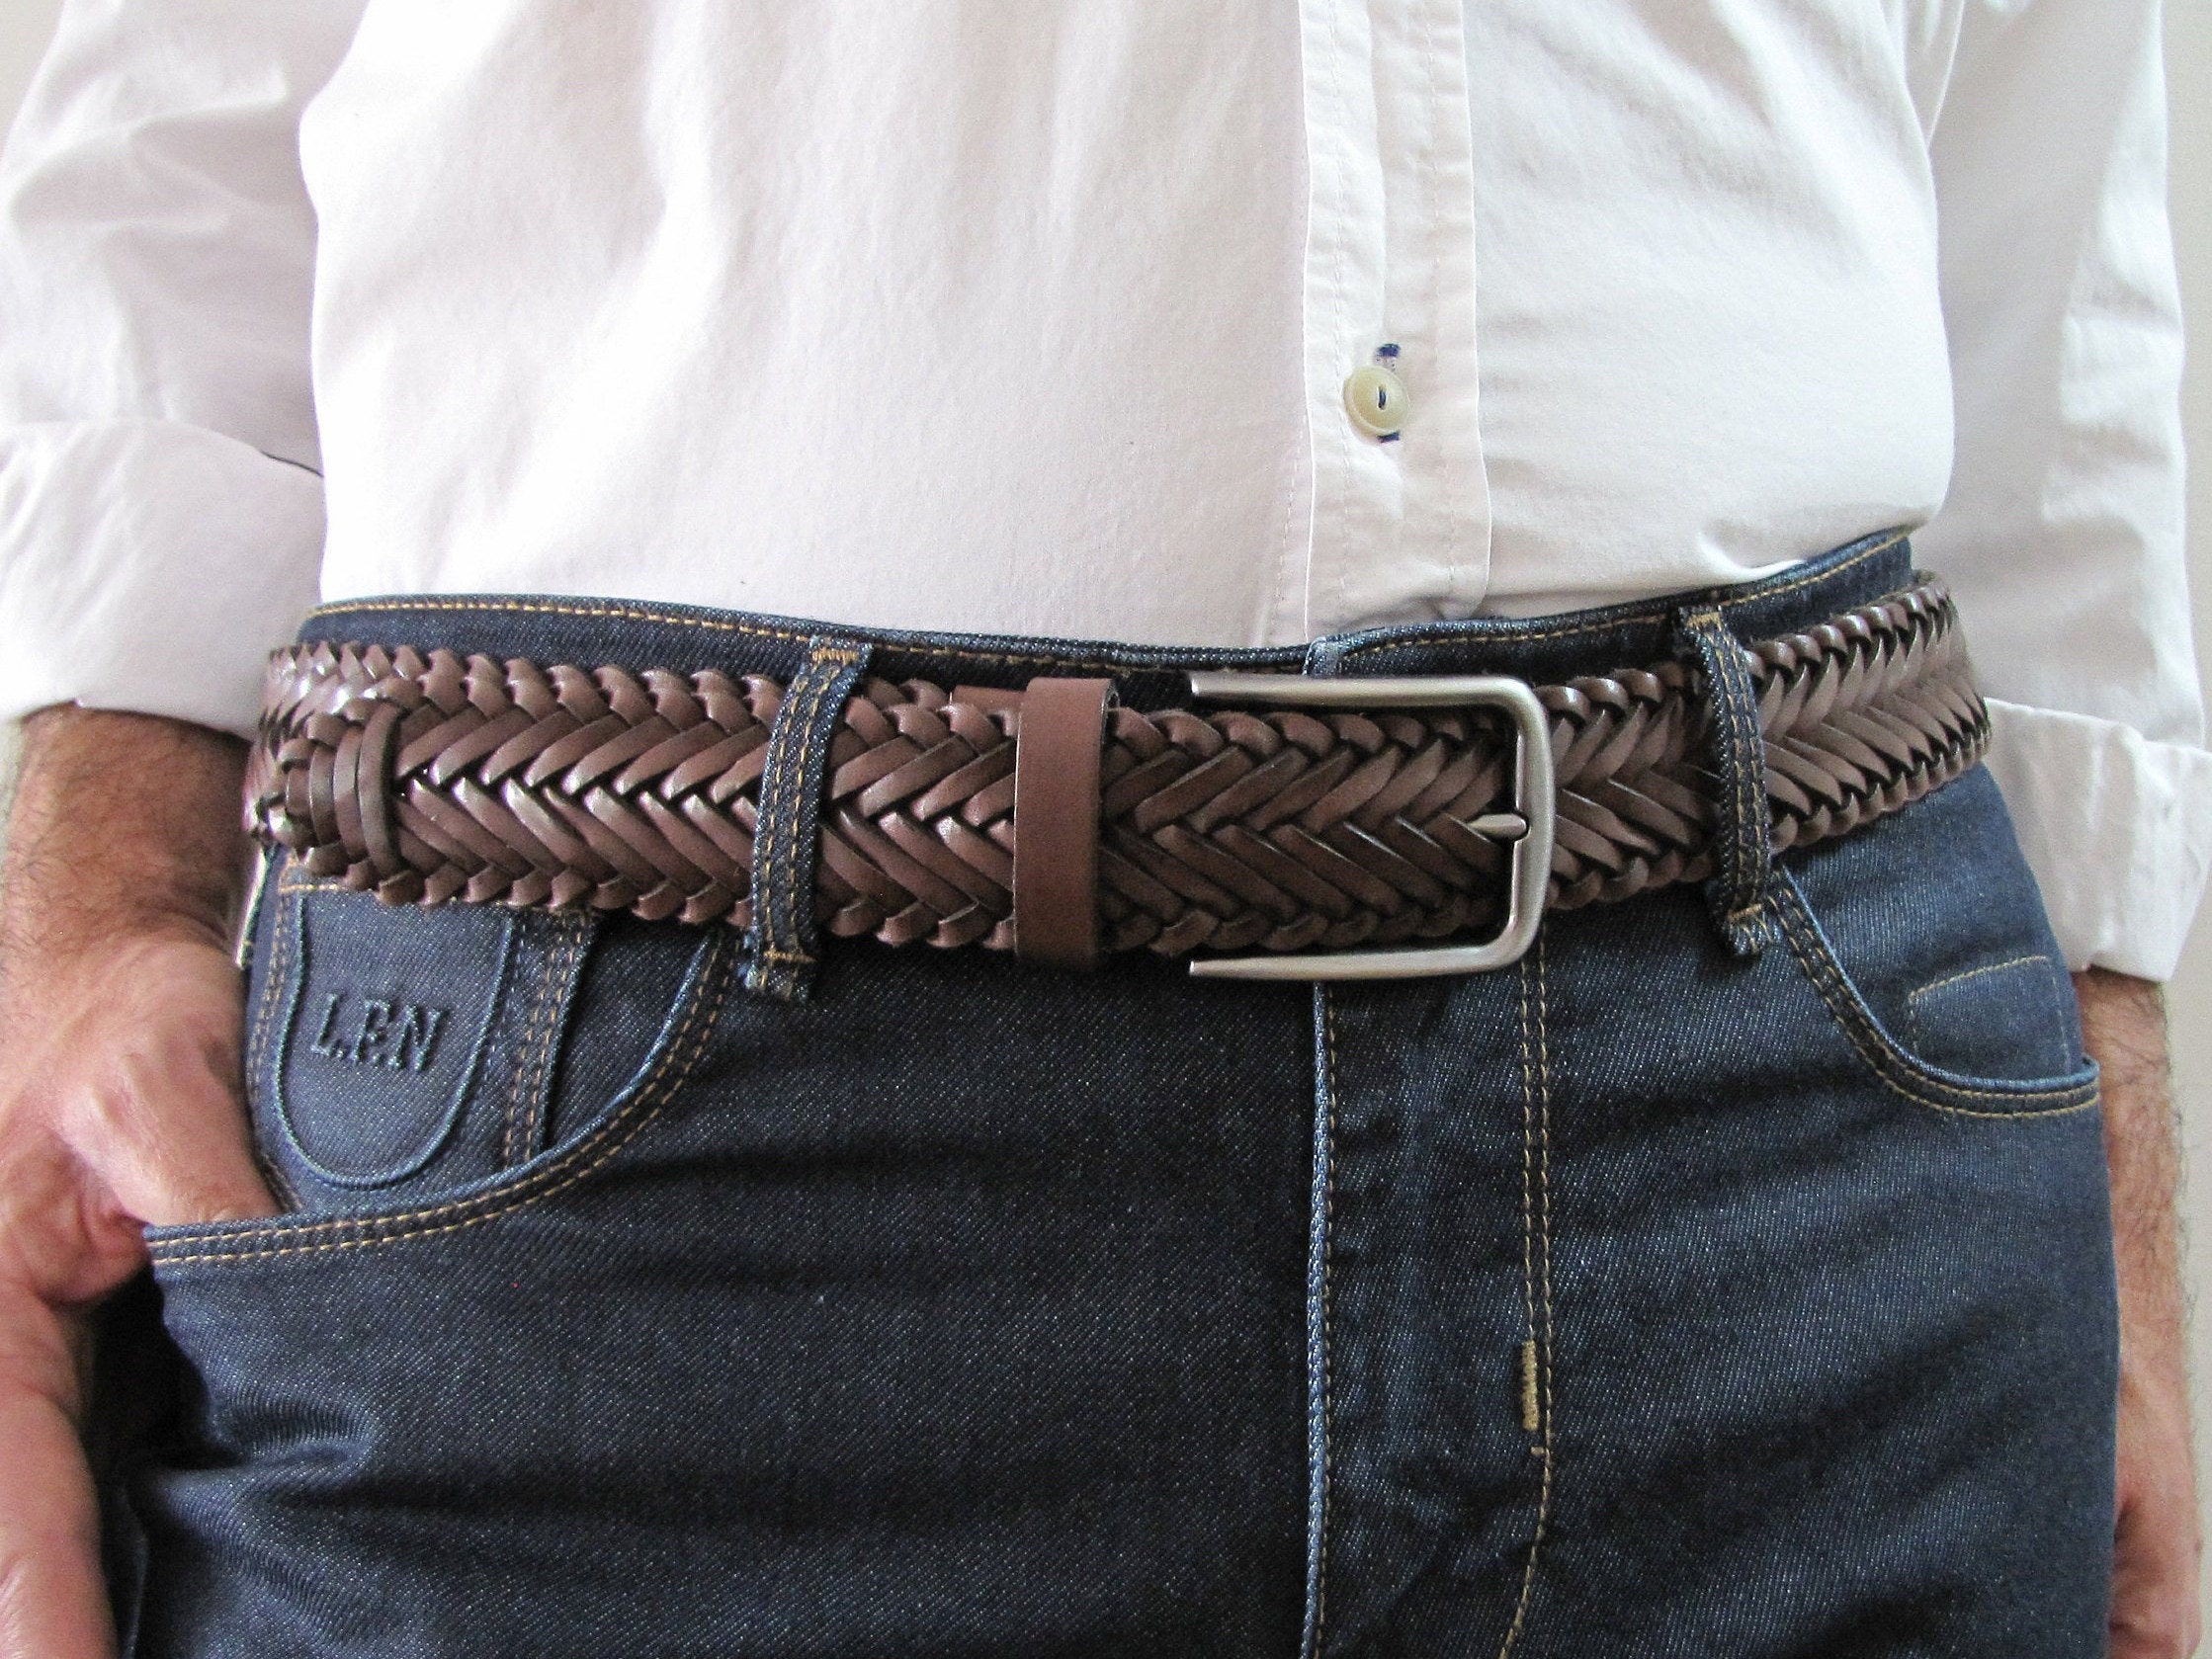 Hand Braid Leather Belt, Braided Belt Handcrafted for Casual Wear Genuine  Leather Personalised Belt for Men Elegant Gifts High Quality Belt 